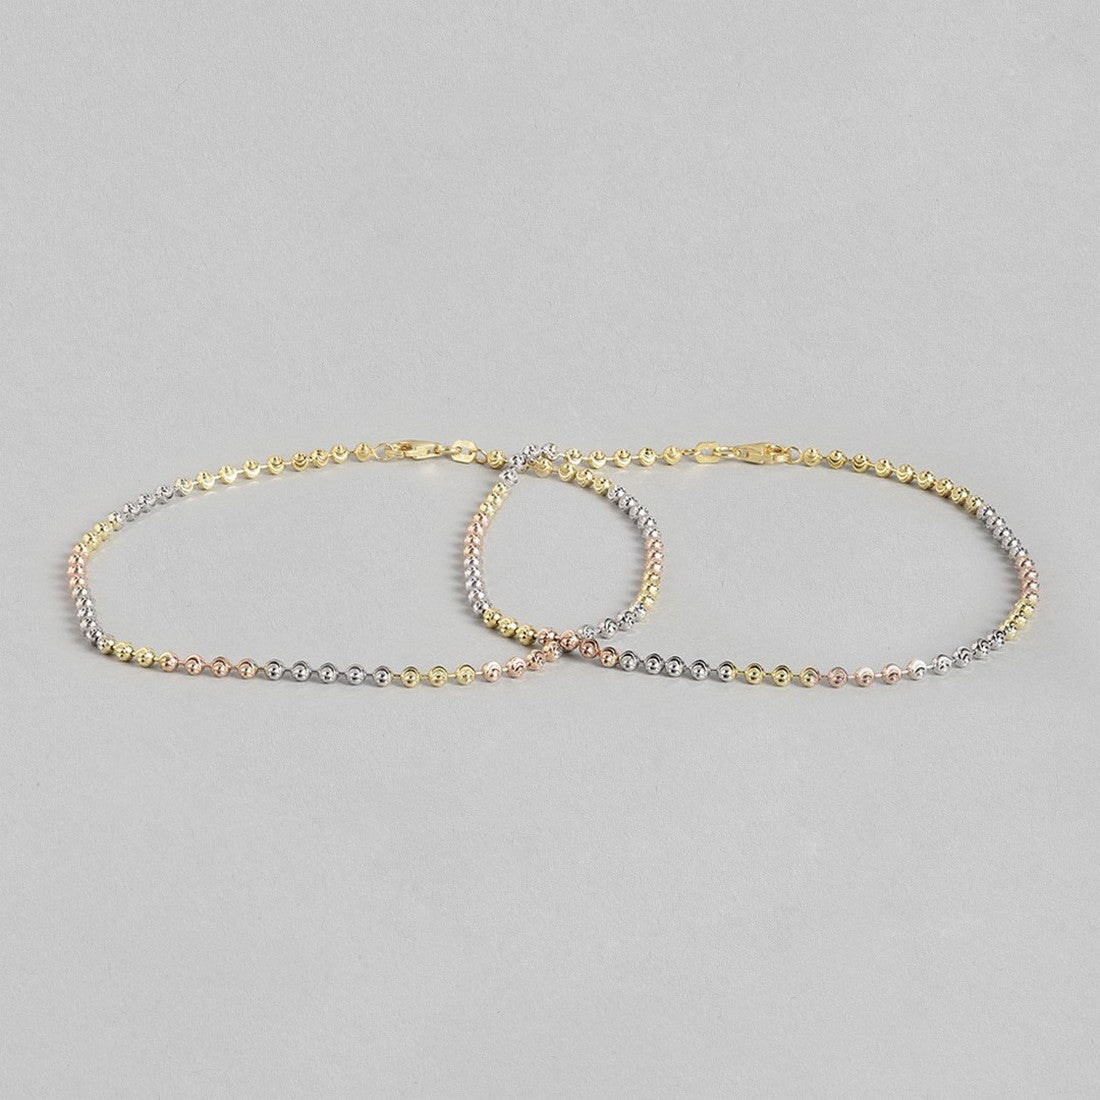 Dual Tone Beaded 925 Sterling Silver Anklet